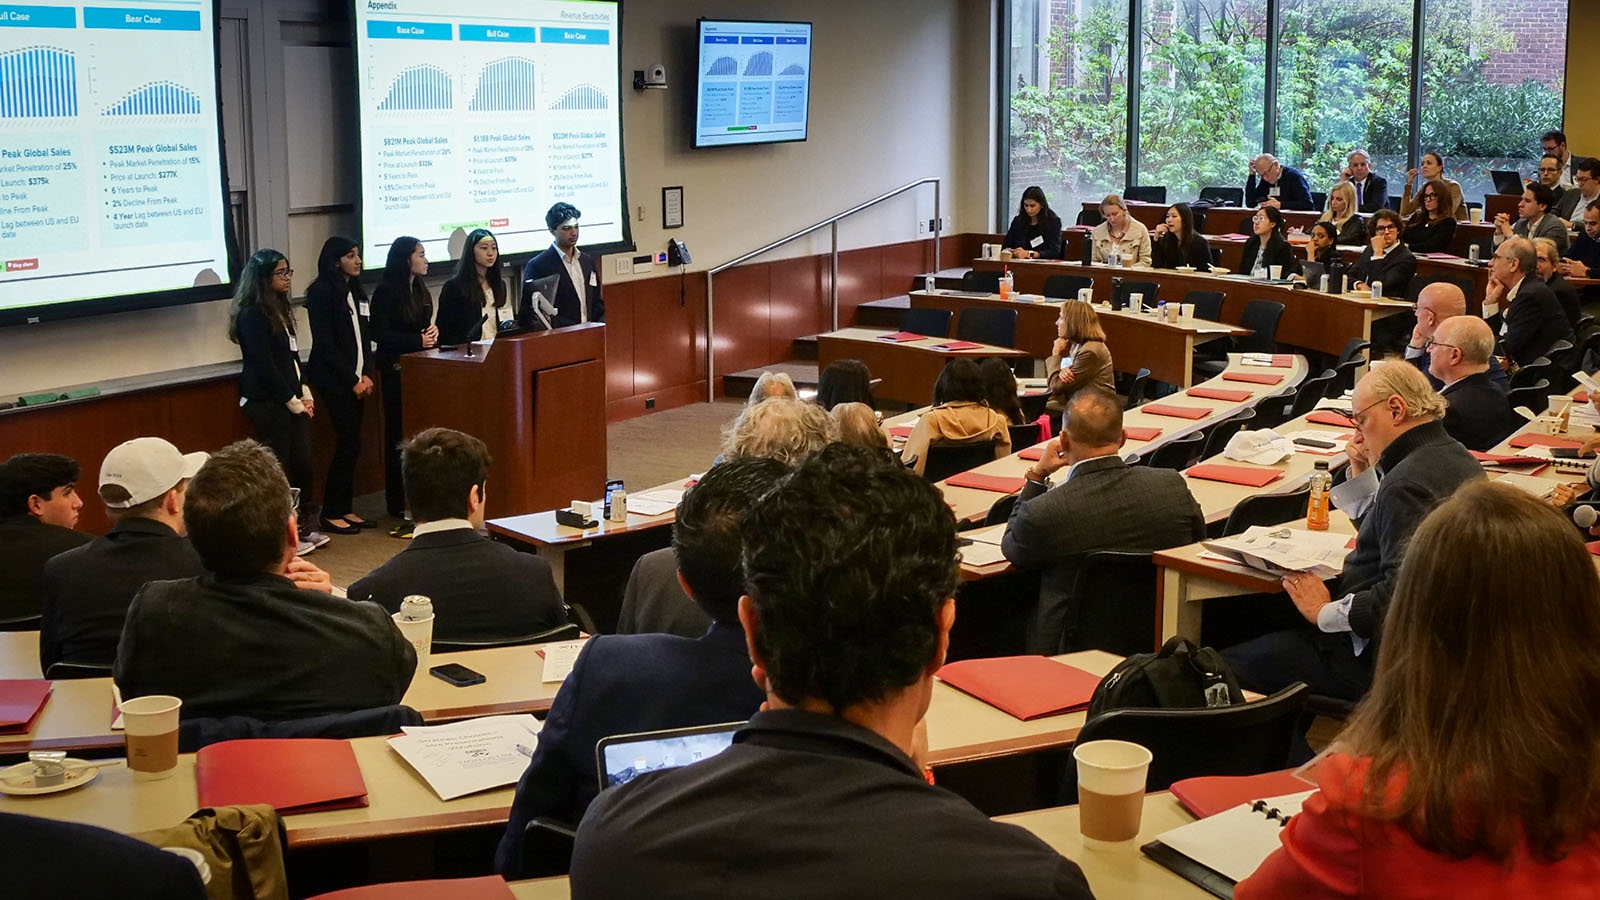 A group of students standing in the front of two large screens, presenting to a room of people sitting in an ampitheater-style classroom.